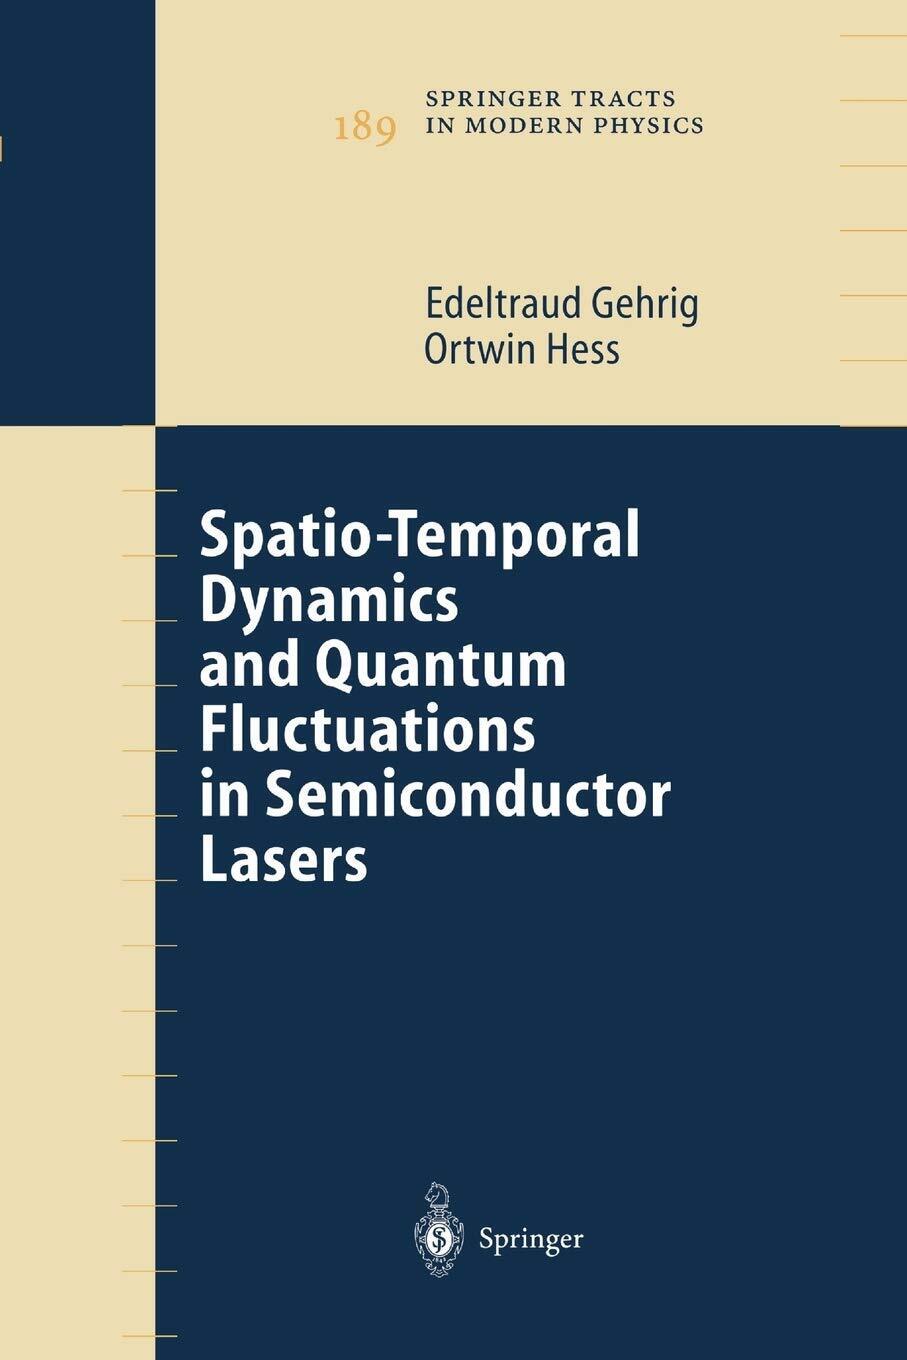 Spatio-temporal Dynamics and Quantum Fluctuations in Semiconductor Lasers - 2010